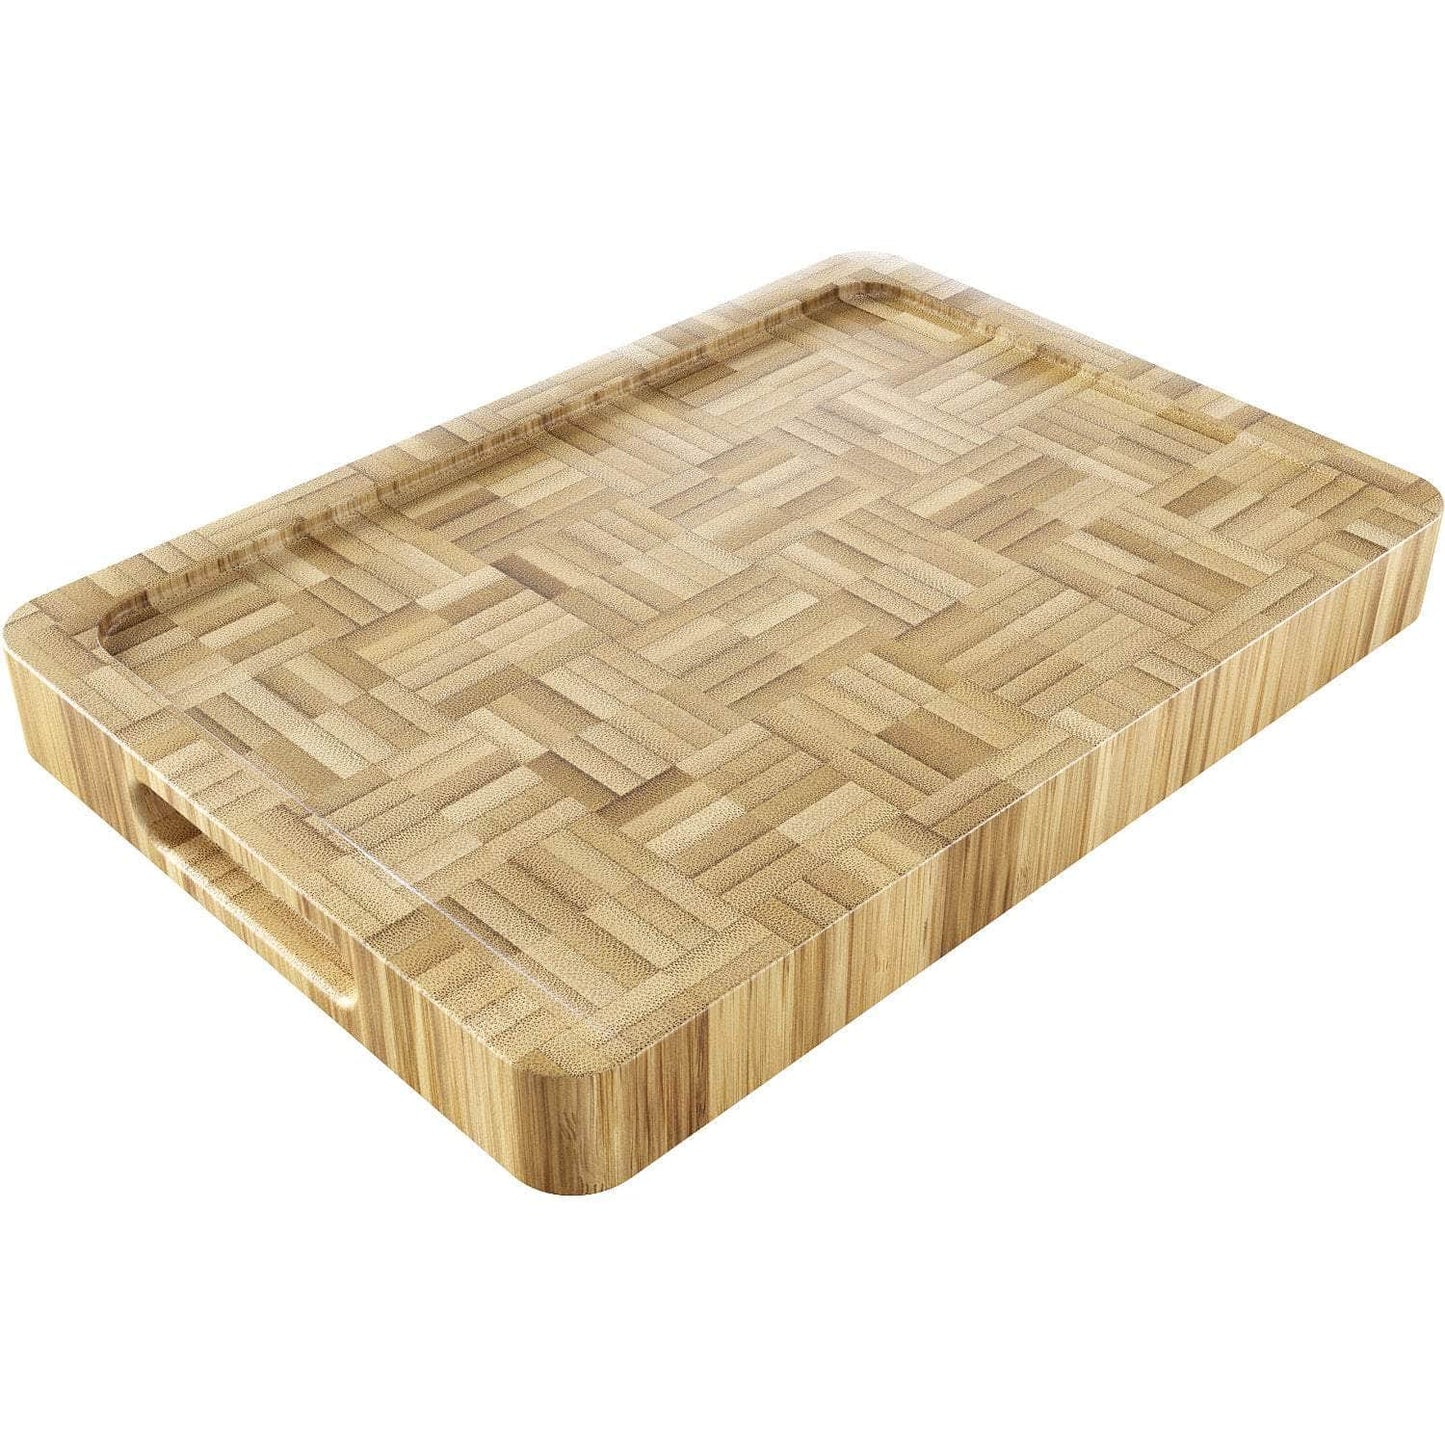 Bamboo chopping board – solid wood breakfast board made of FSC-certified bamboo, size M, by KD Essentials